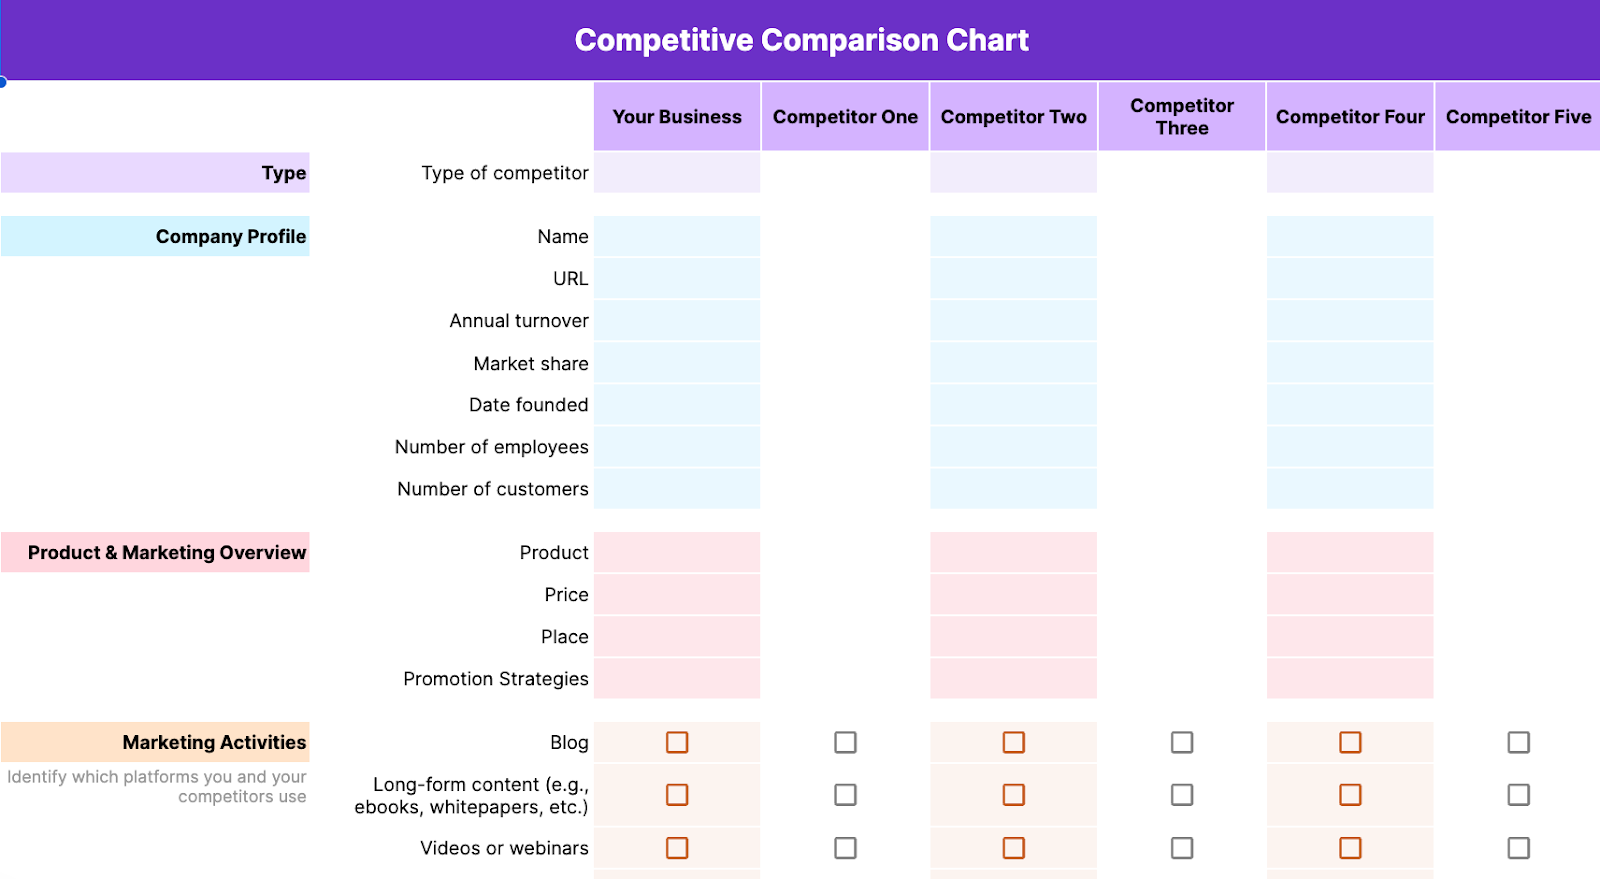 Sample competitory  examination  illustration  to measure  a concern  alongside competitors